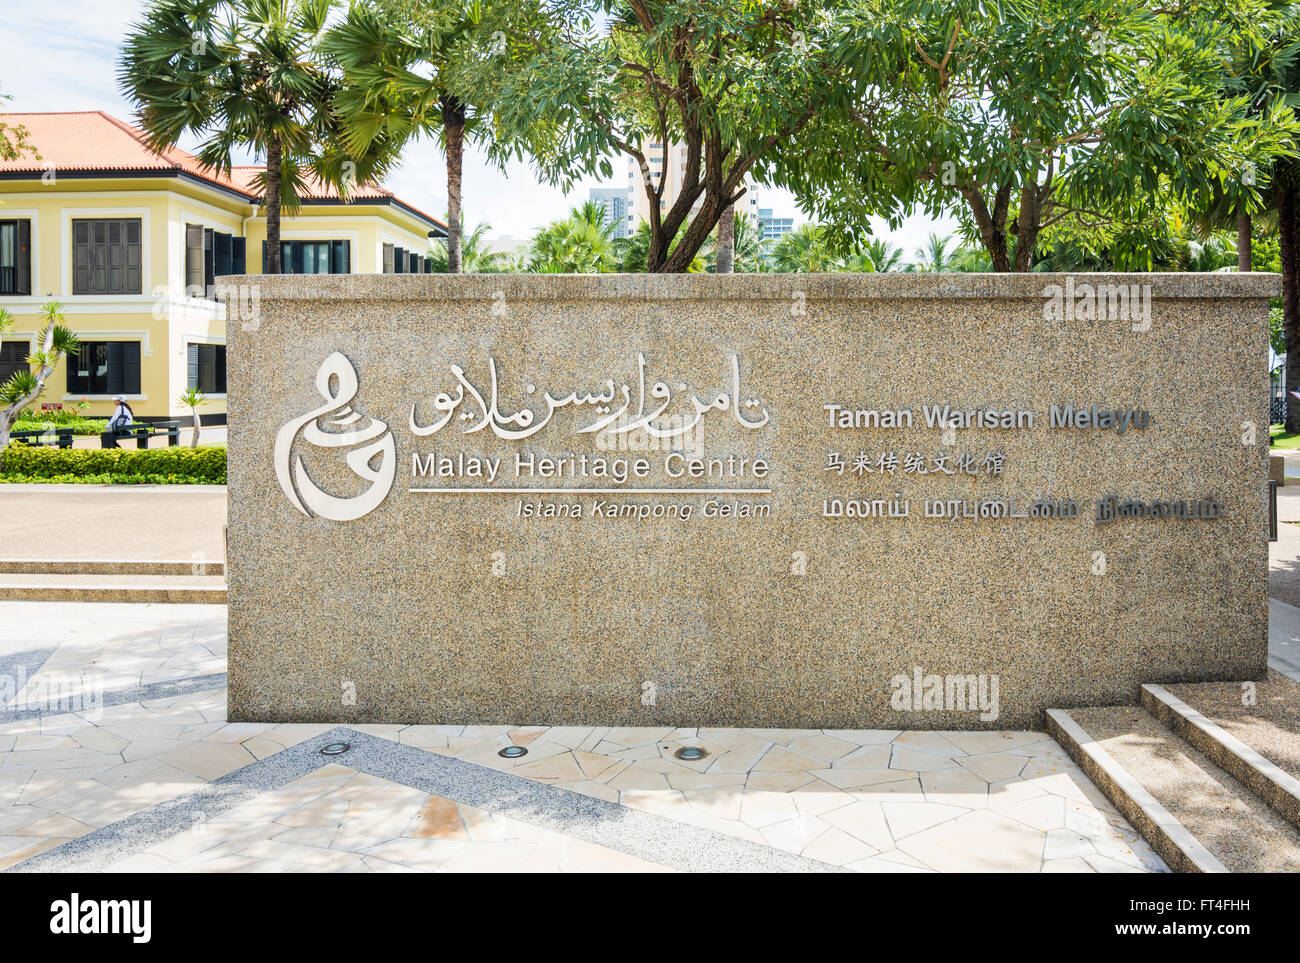 Malay Heritage Center, Kampong Glam, Singapour Banque D'Images